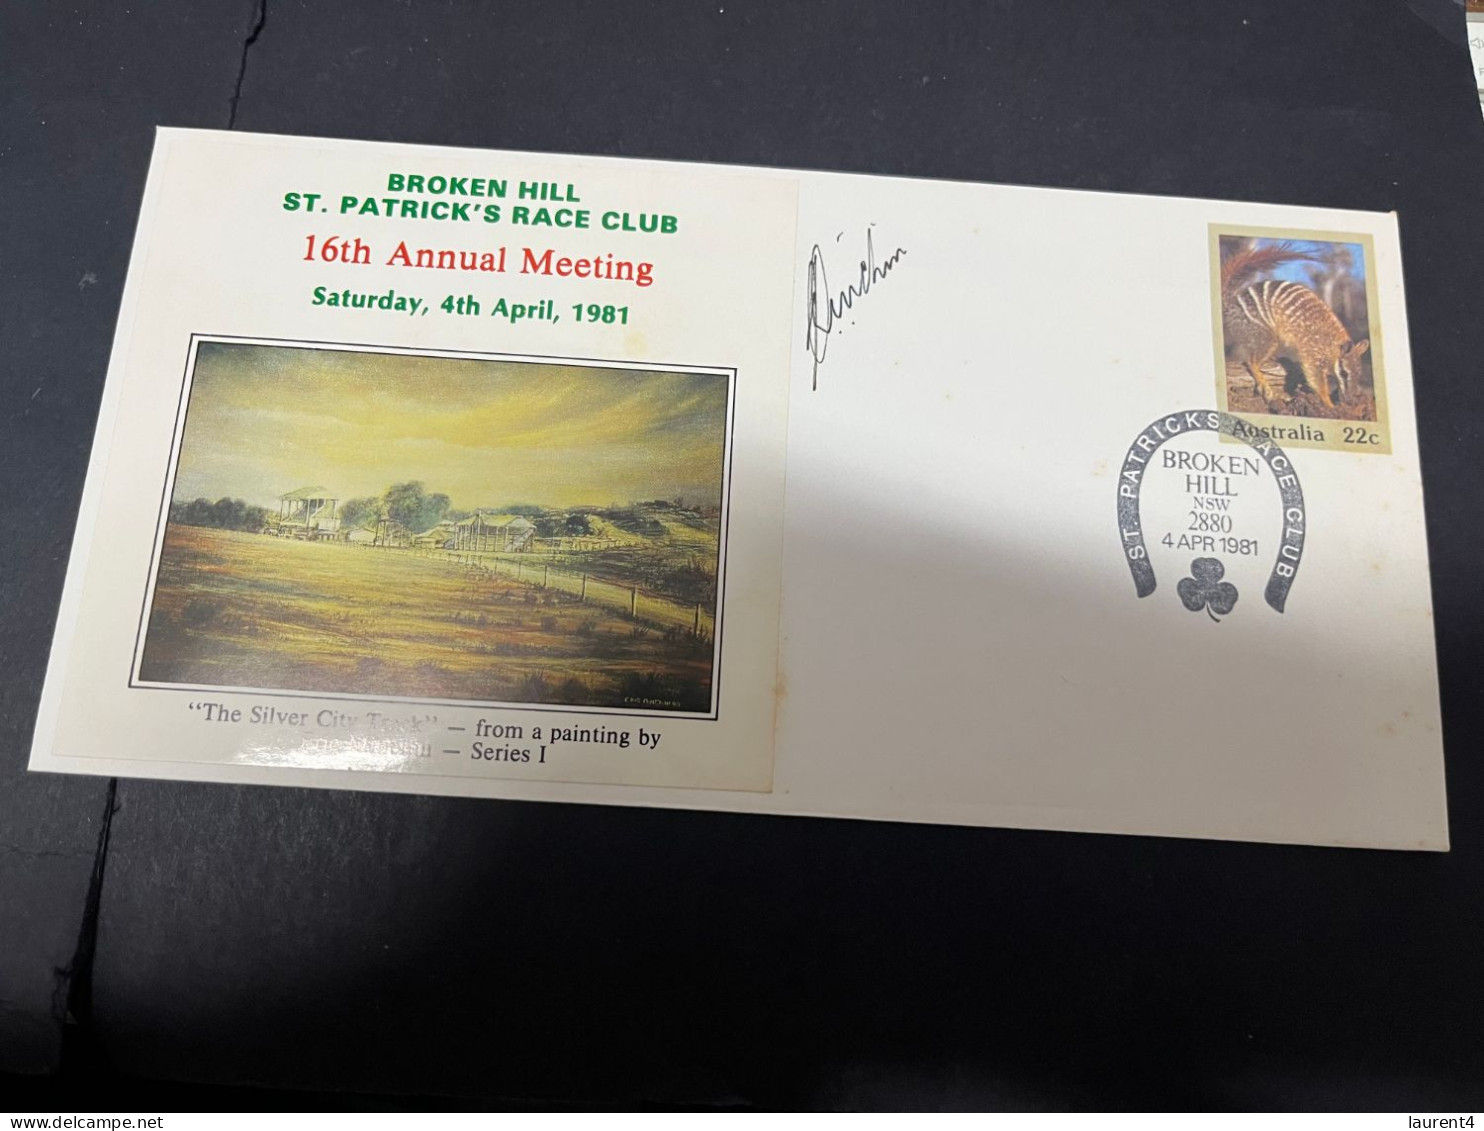 26-4-2024 (3 Z 9) Australia FDC - 1981 - Broken Hill St Patrick's Race Club 16th Annual Meeting (special P/m) 2 Covers - Ersttagsbelege (FDC)